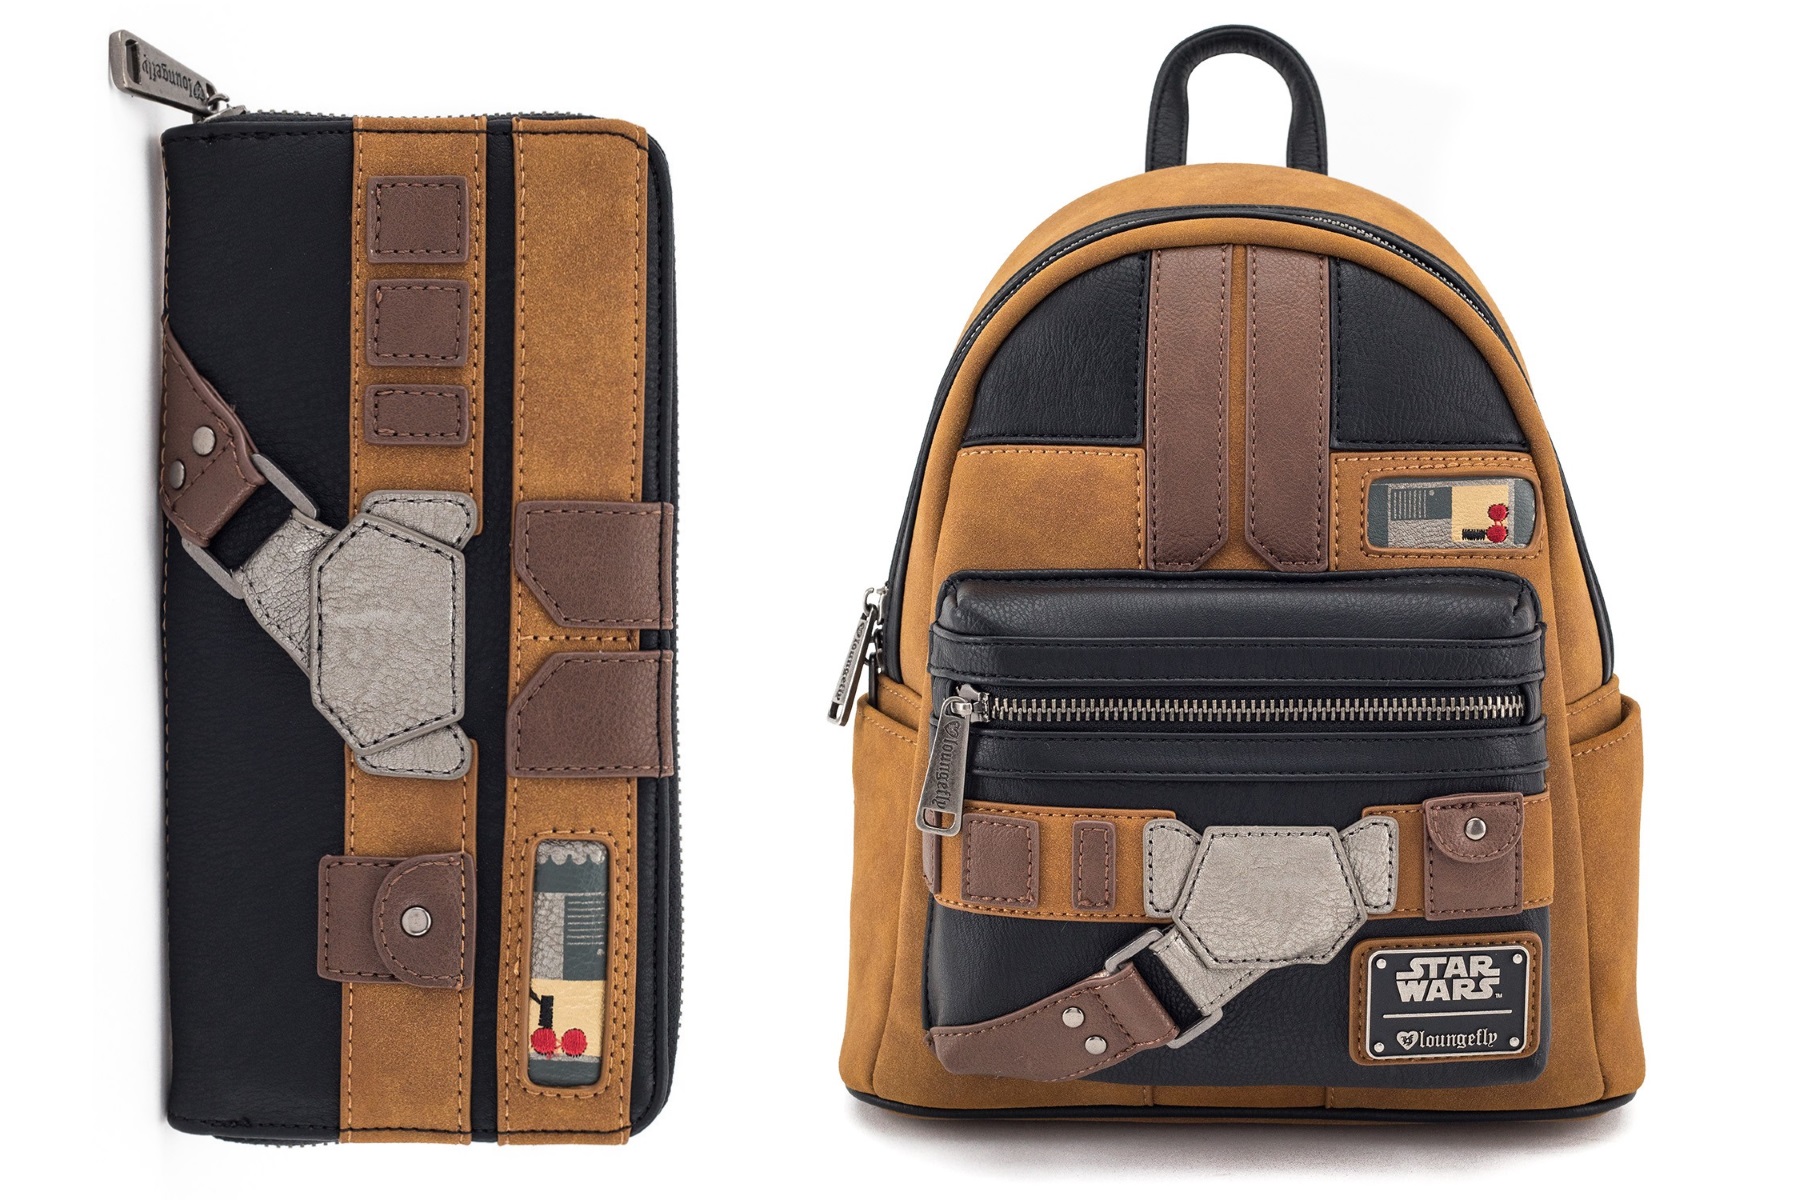 Disney Store Star Wars Story Han Solo Book Bag Lando Nest Backpack for Adults